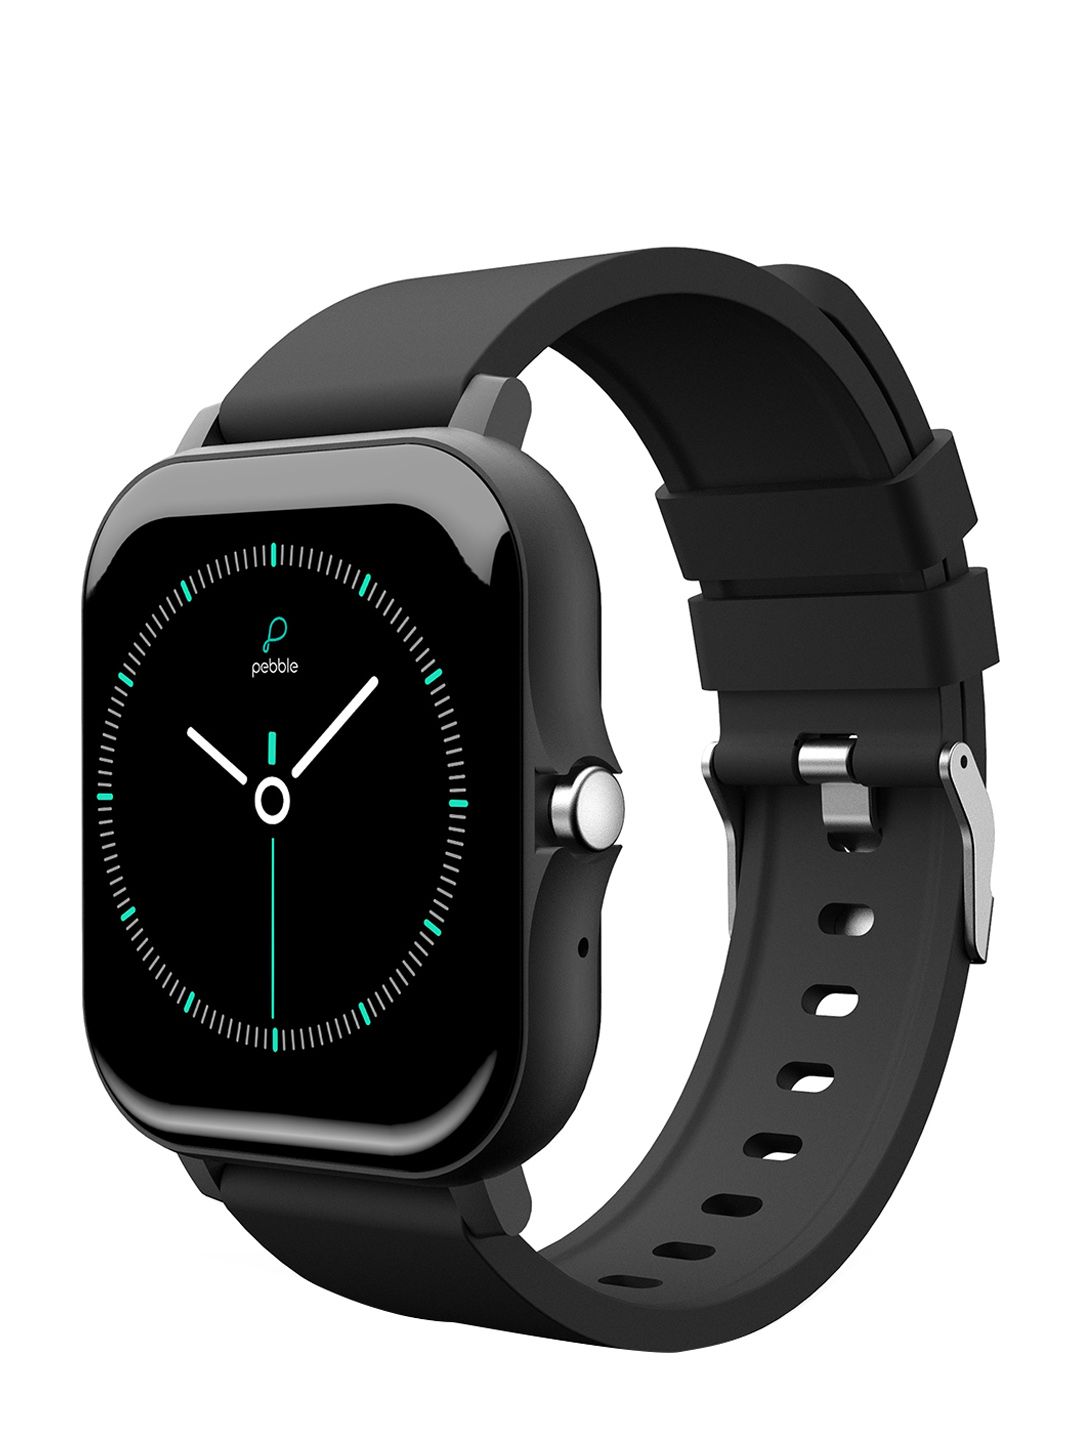 pebble Unisex Black Prism Ultra 1.69 inch HD Display Smartwatch with SPO2 & HR Monitor Price in India